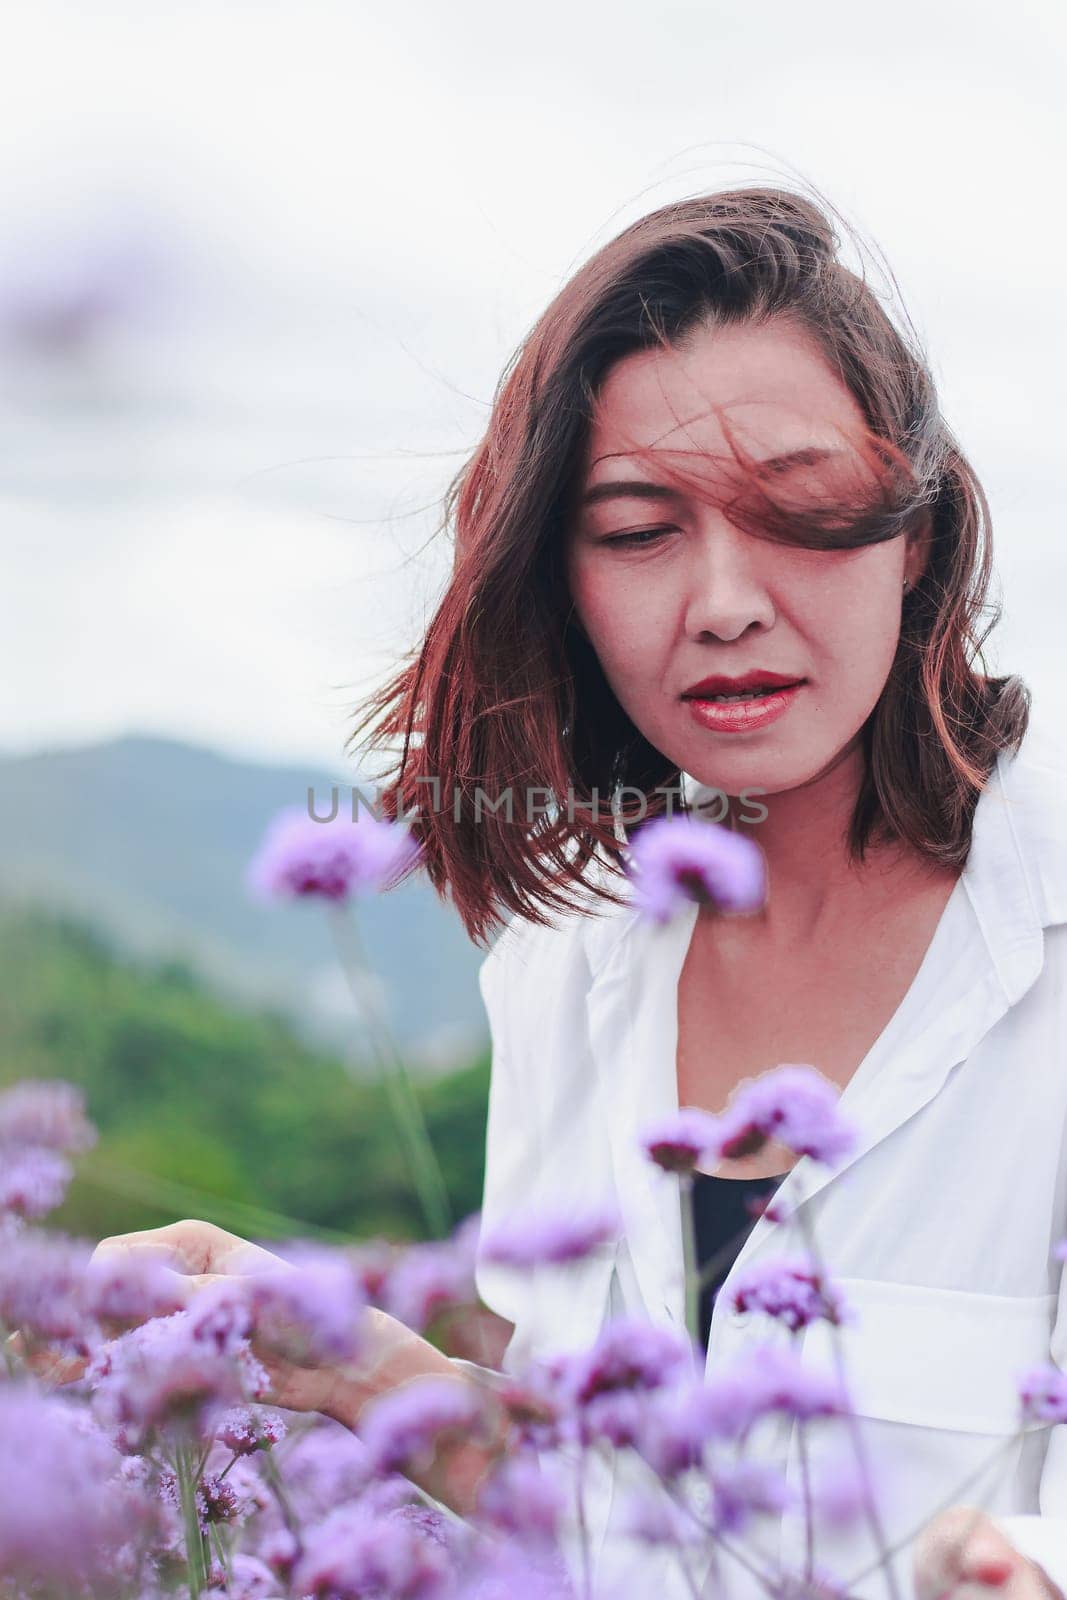 Women  are blooming and beautiful in the rainy season. by Puripatt